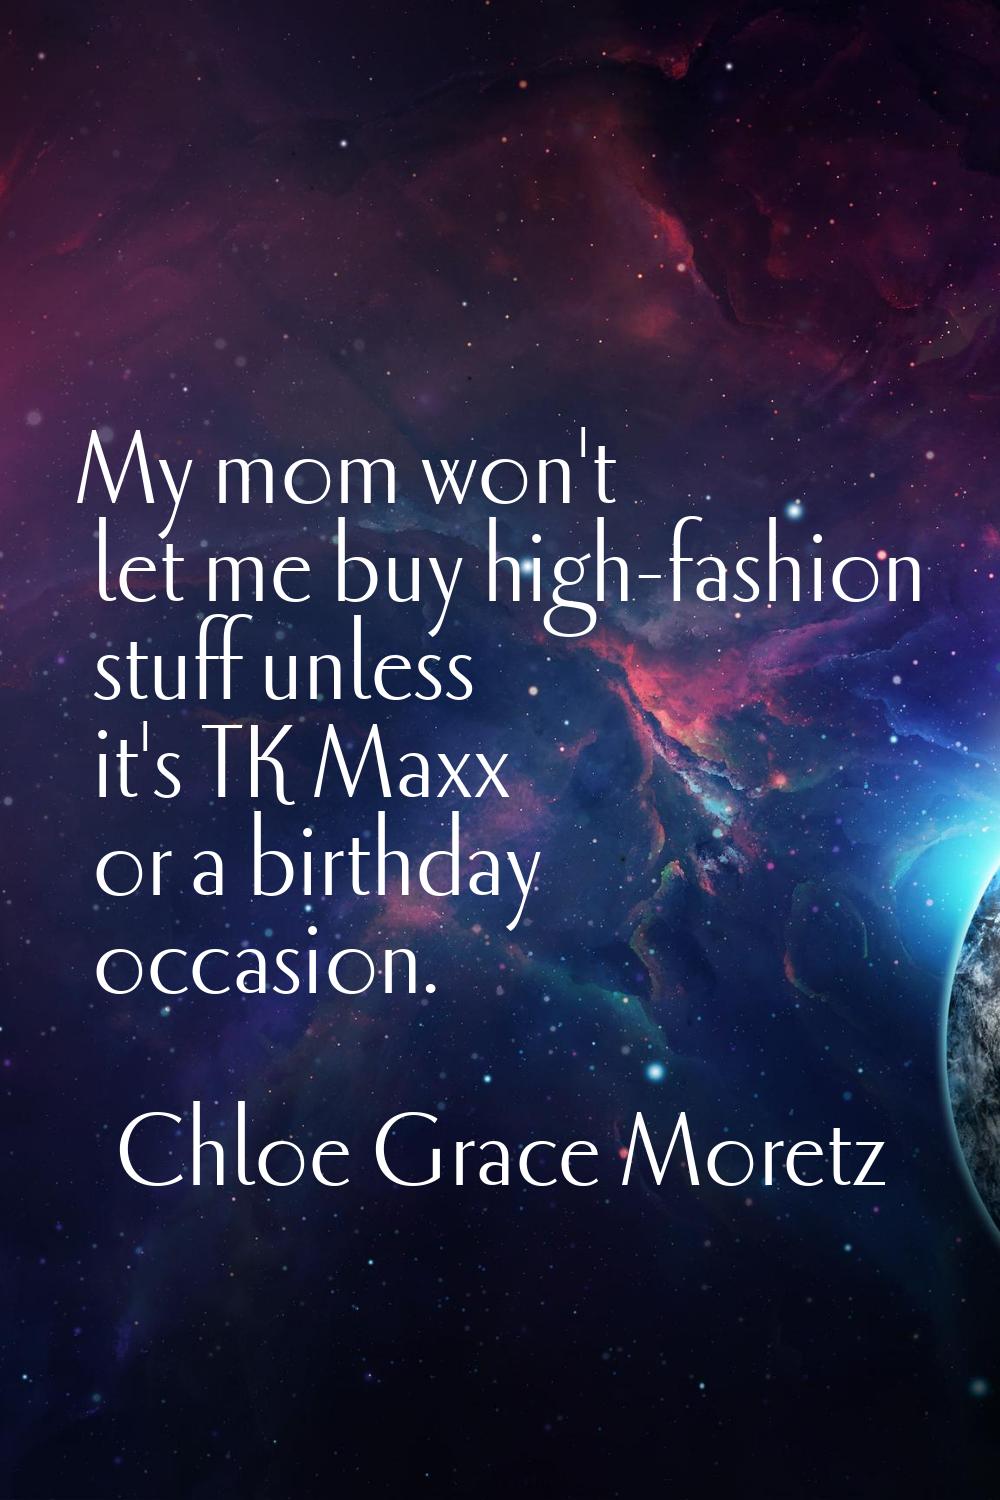 My mom won't let me buy high-fashion stuff unless it's TK Maxx or a birthday occasion.